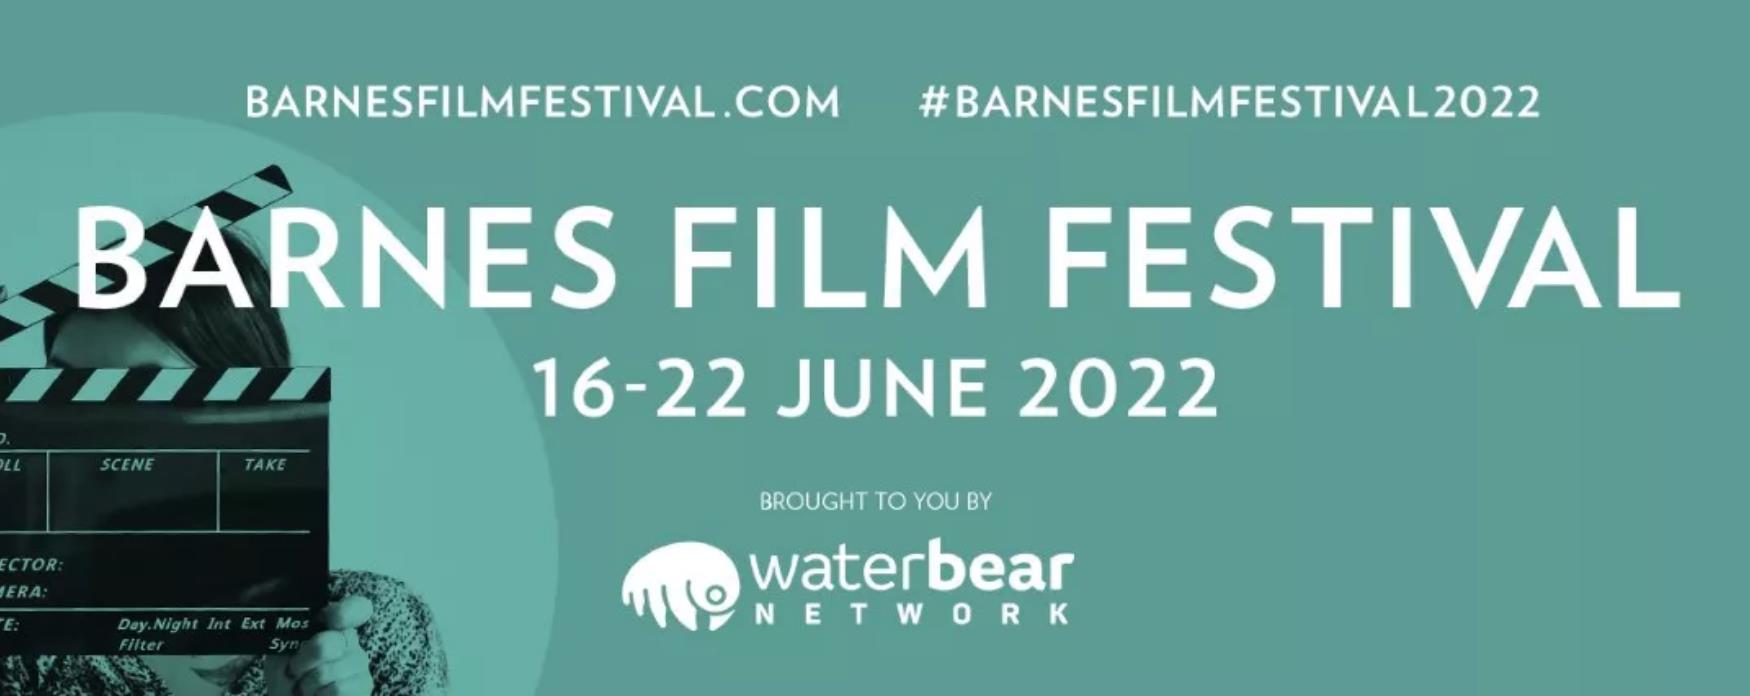 Header image of Barnes Film Festival. The event is sponsored by waterbear